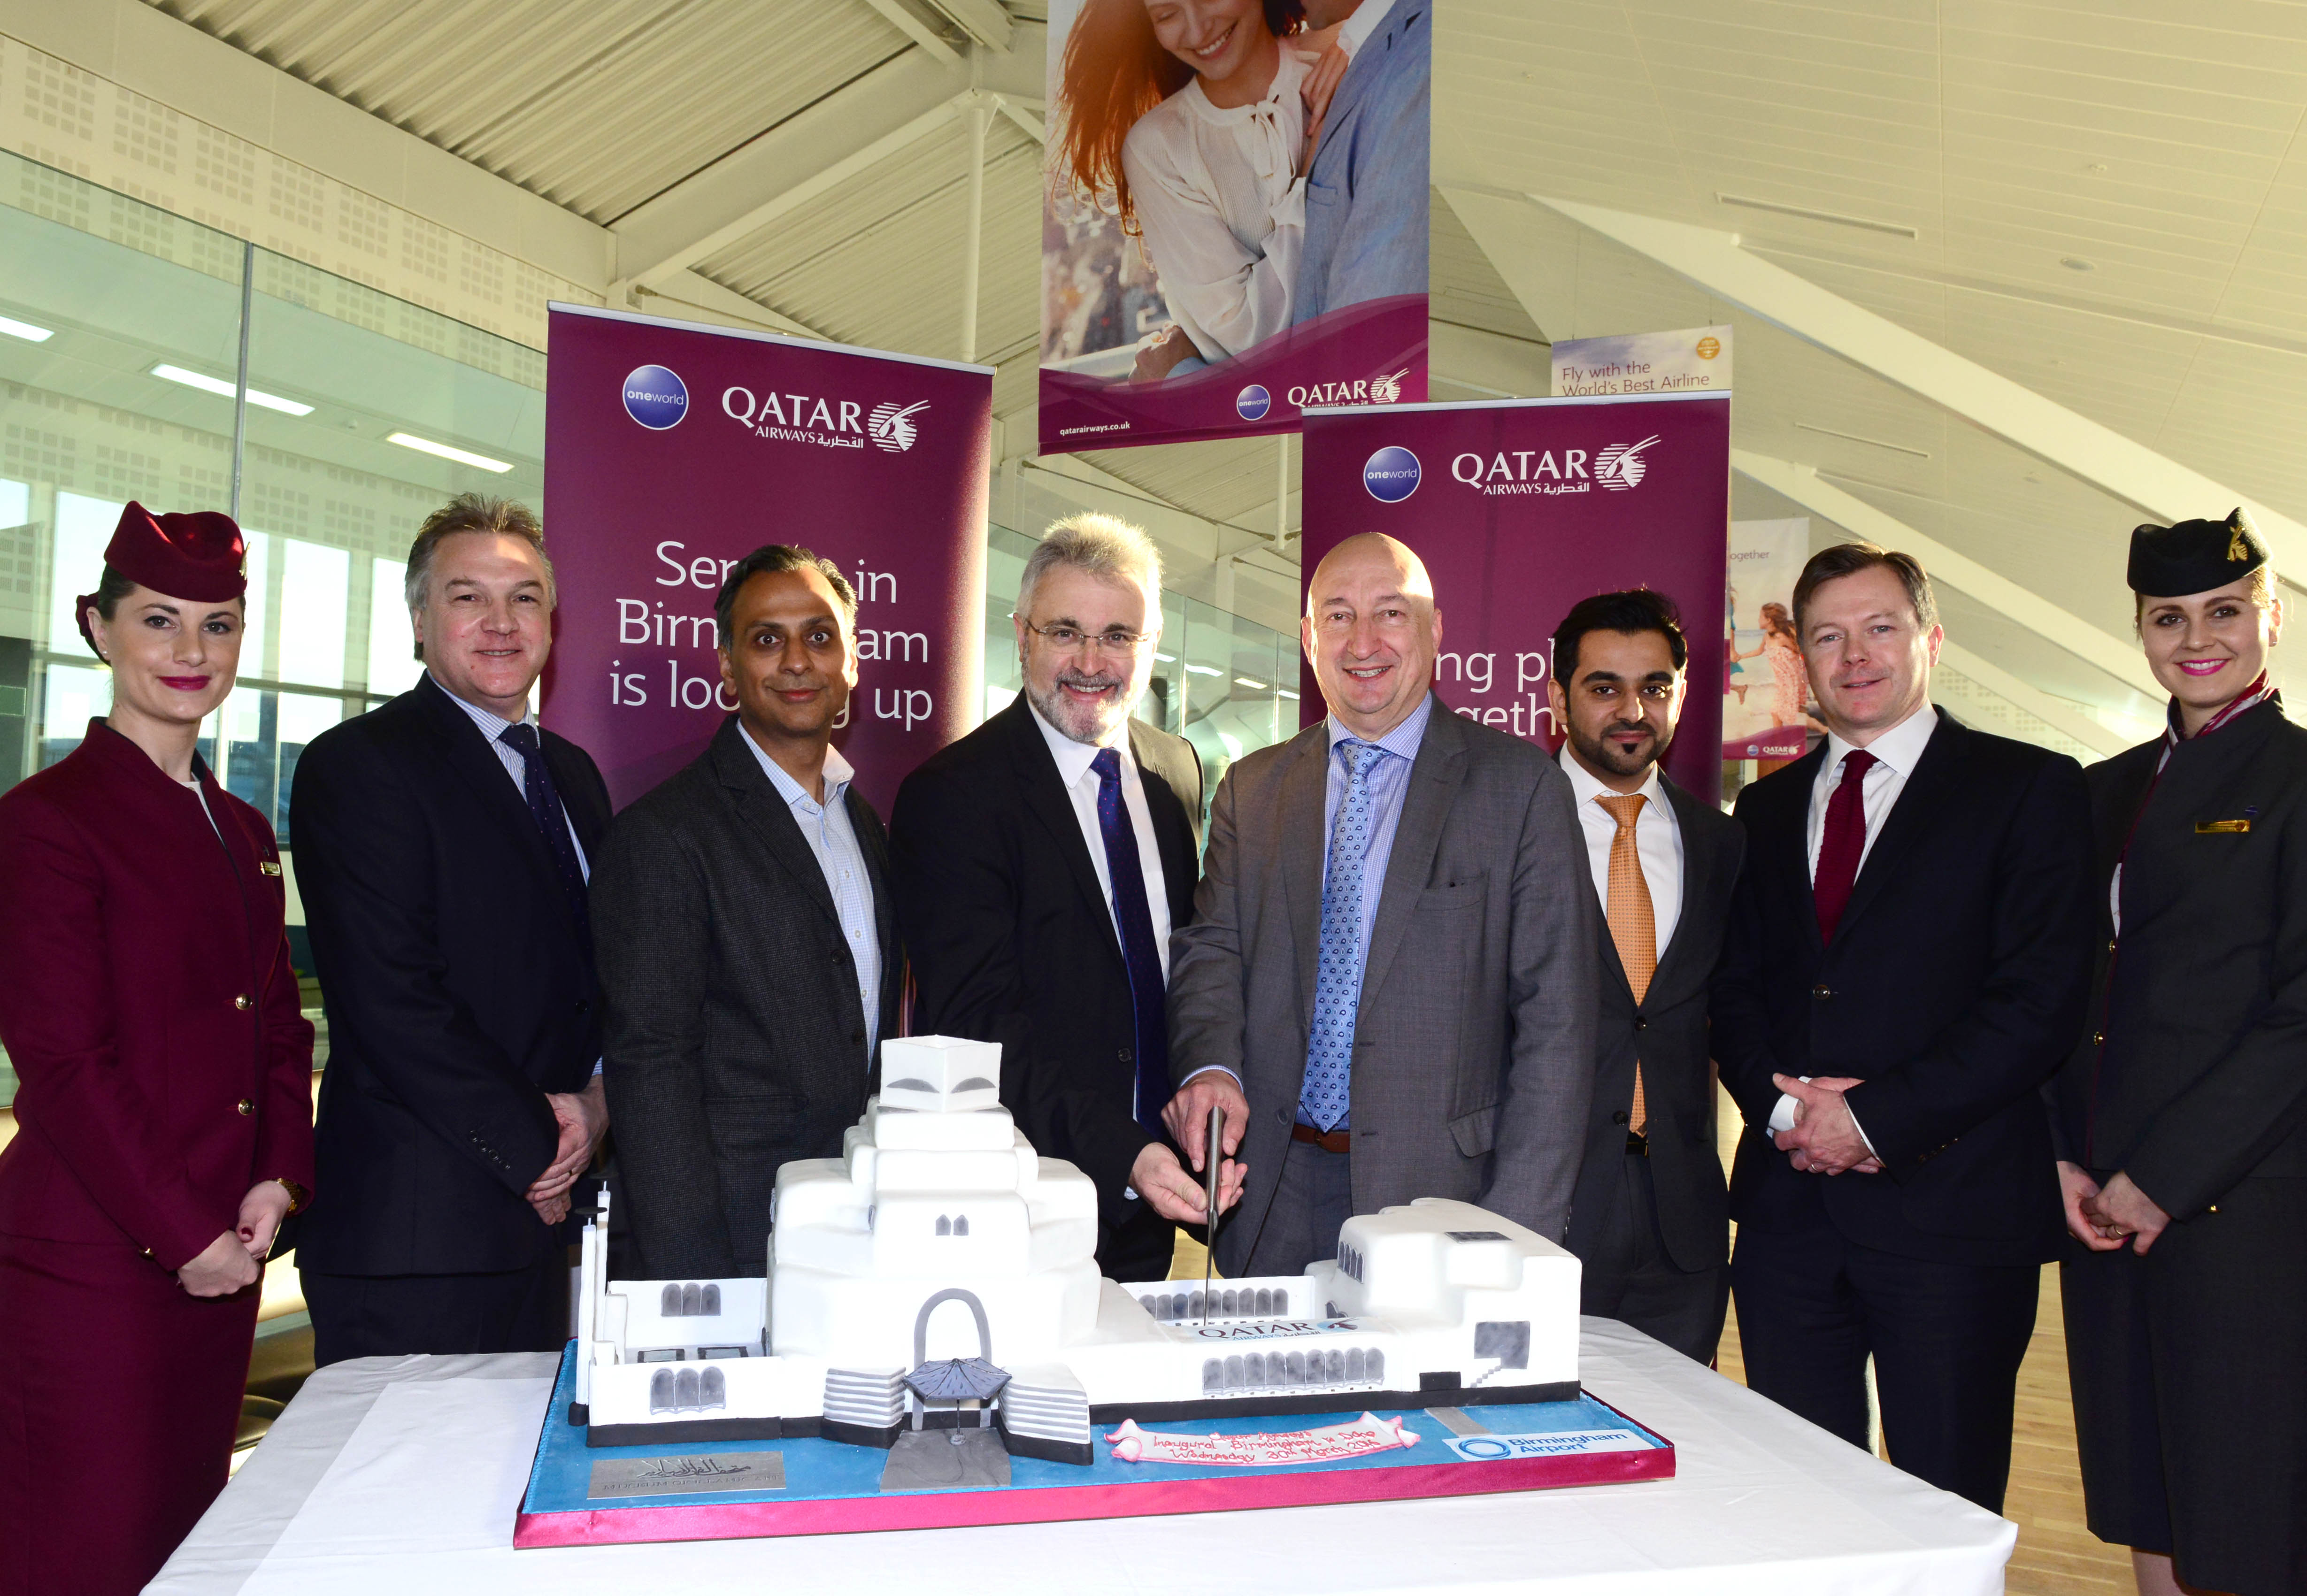 Pictured with a celebratory cake replicating the iconic Museum of Islamic Art in Doha are, left to right; Mr. Richard Oliver, Qatar Airways Country Manager U.K. & Ireland; His Excellency Mr. Ajay Sharma, U.K Ambassador to Qatar; Mr. Paul Kehoe, Chief Executive Officer of Birmingham Airport; Dr. Hugh Dunleavy, Qatar Airways Chief Commercial Officer; His Excellency Mr. Hamad Al Muftah, Qatari Deputy Ambassador to the U.K. and Mr. Jonathan Harding, Qatar Airways Senior Vice President NSW Europe. Picture by Qatar Airways.